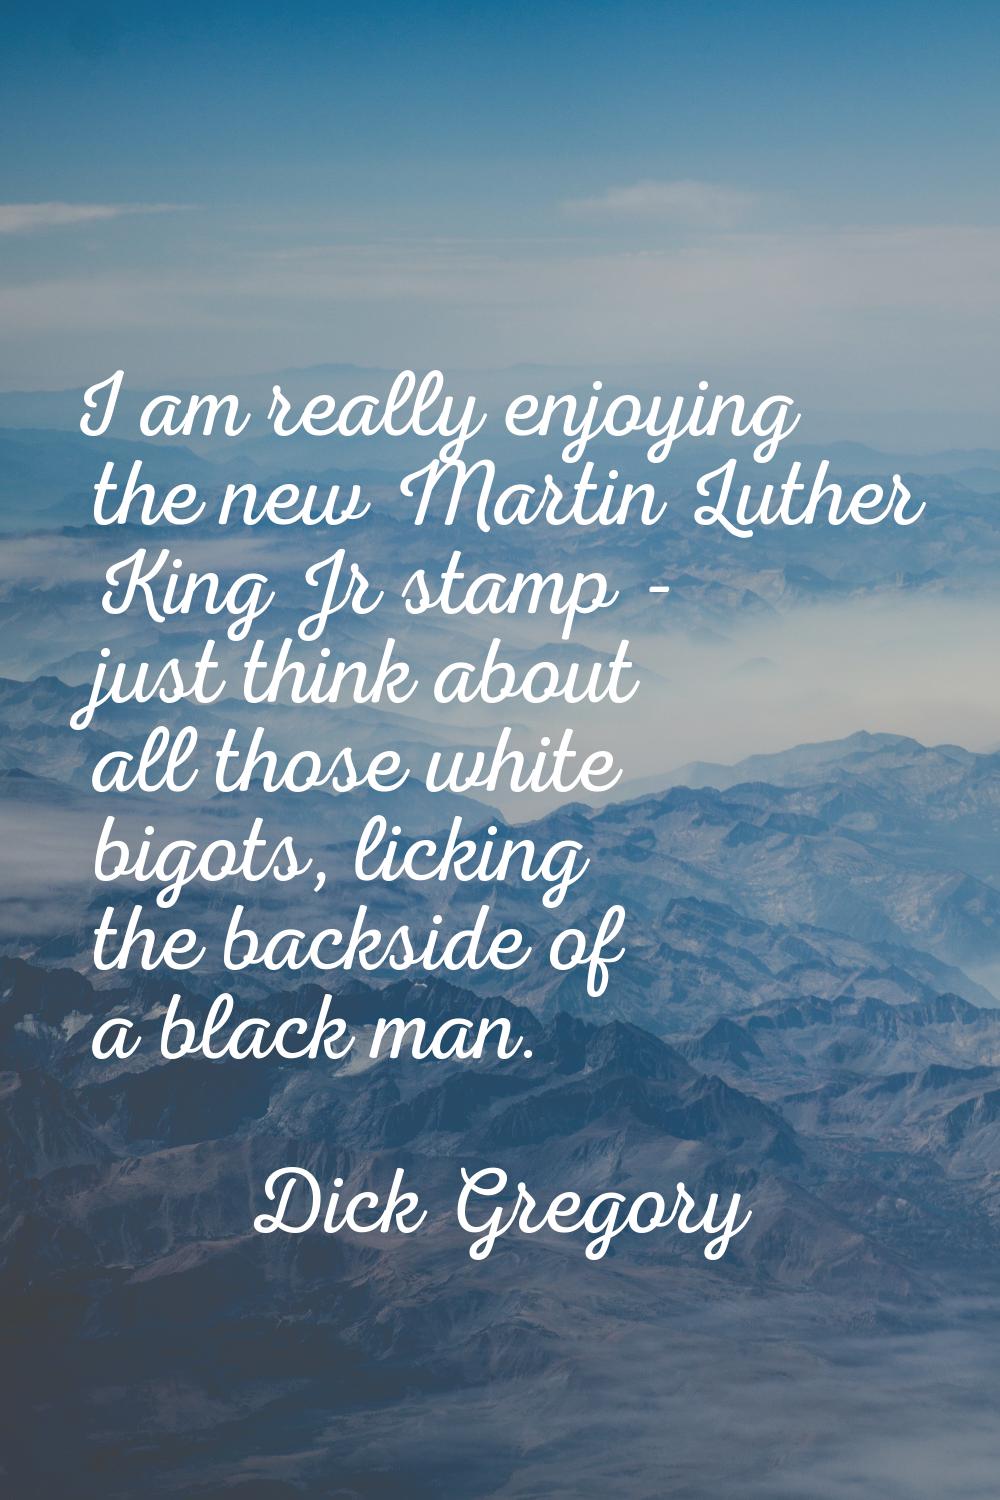 I am really enjoying the new Martin Luther King Jr stamp - just think about all those white bigots,